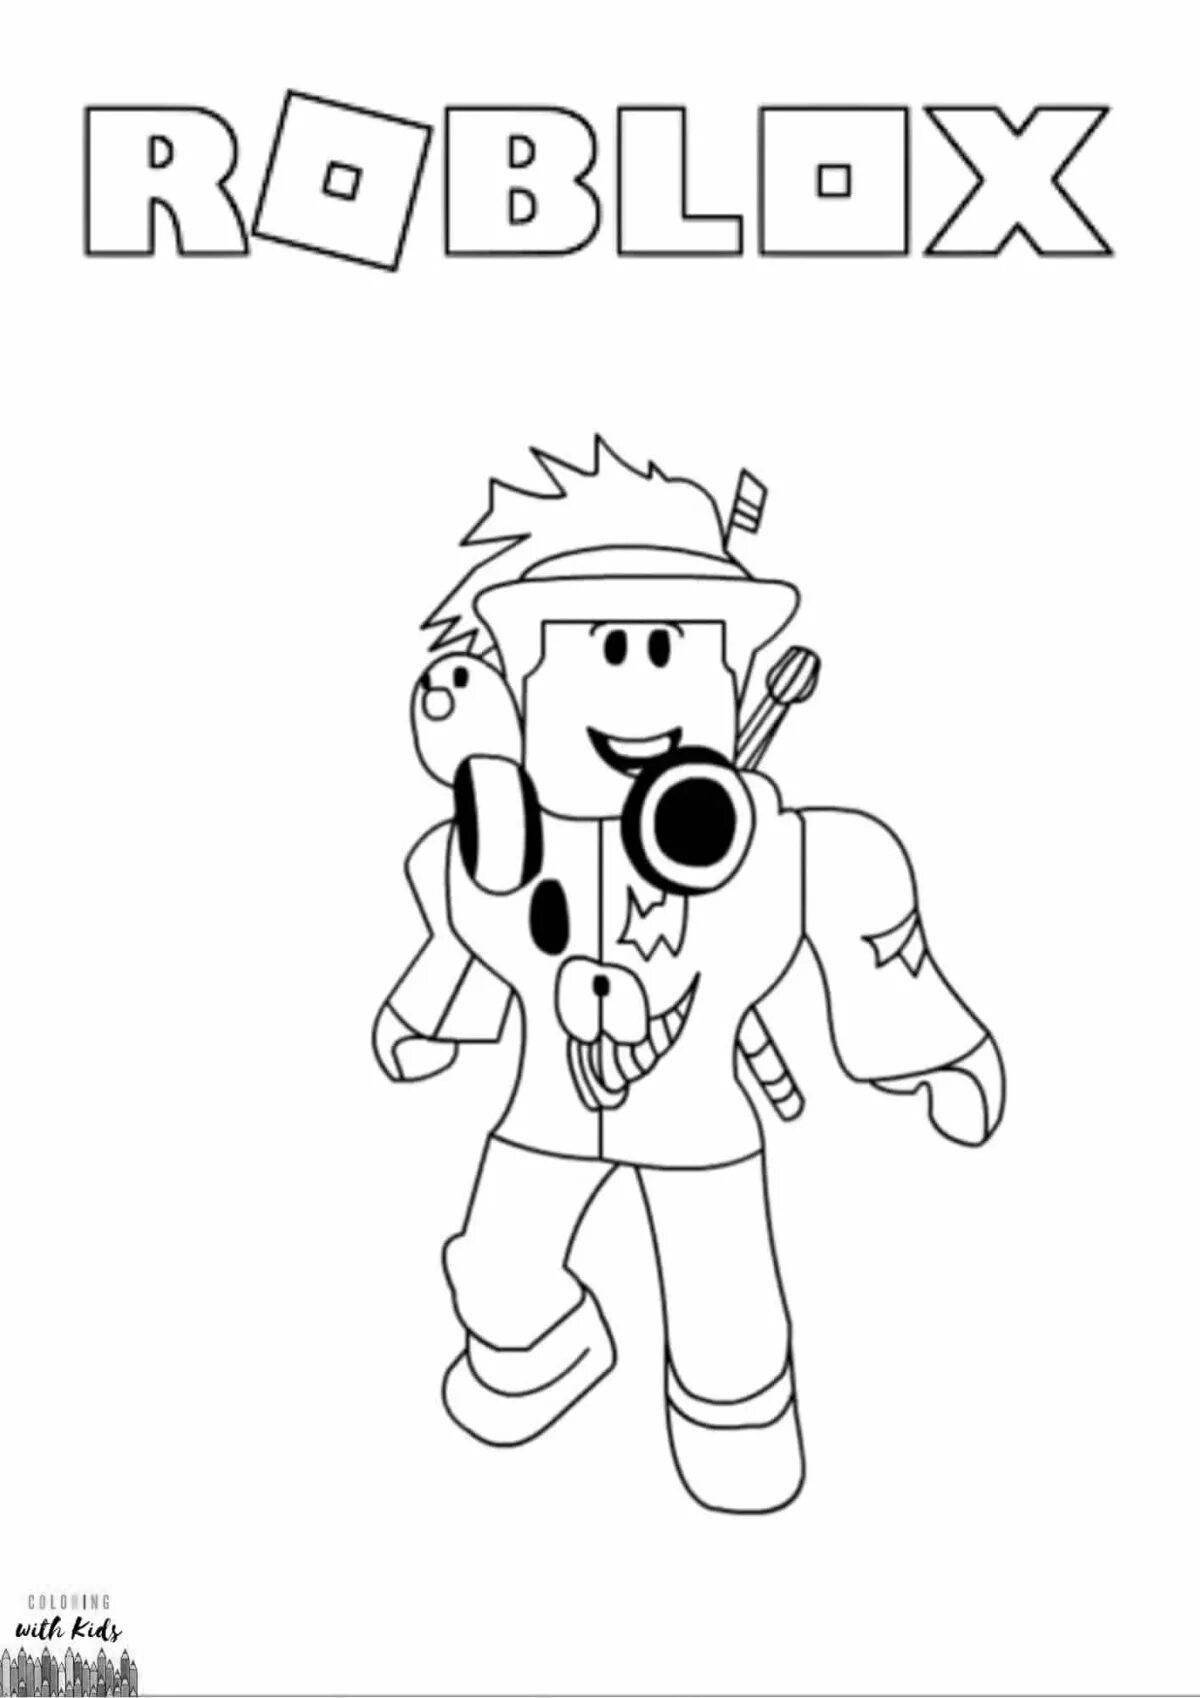 Fascinating roblox coloring page